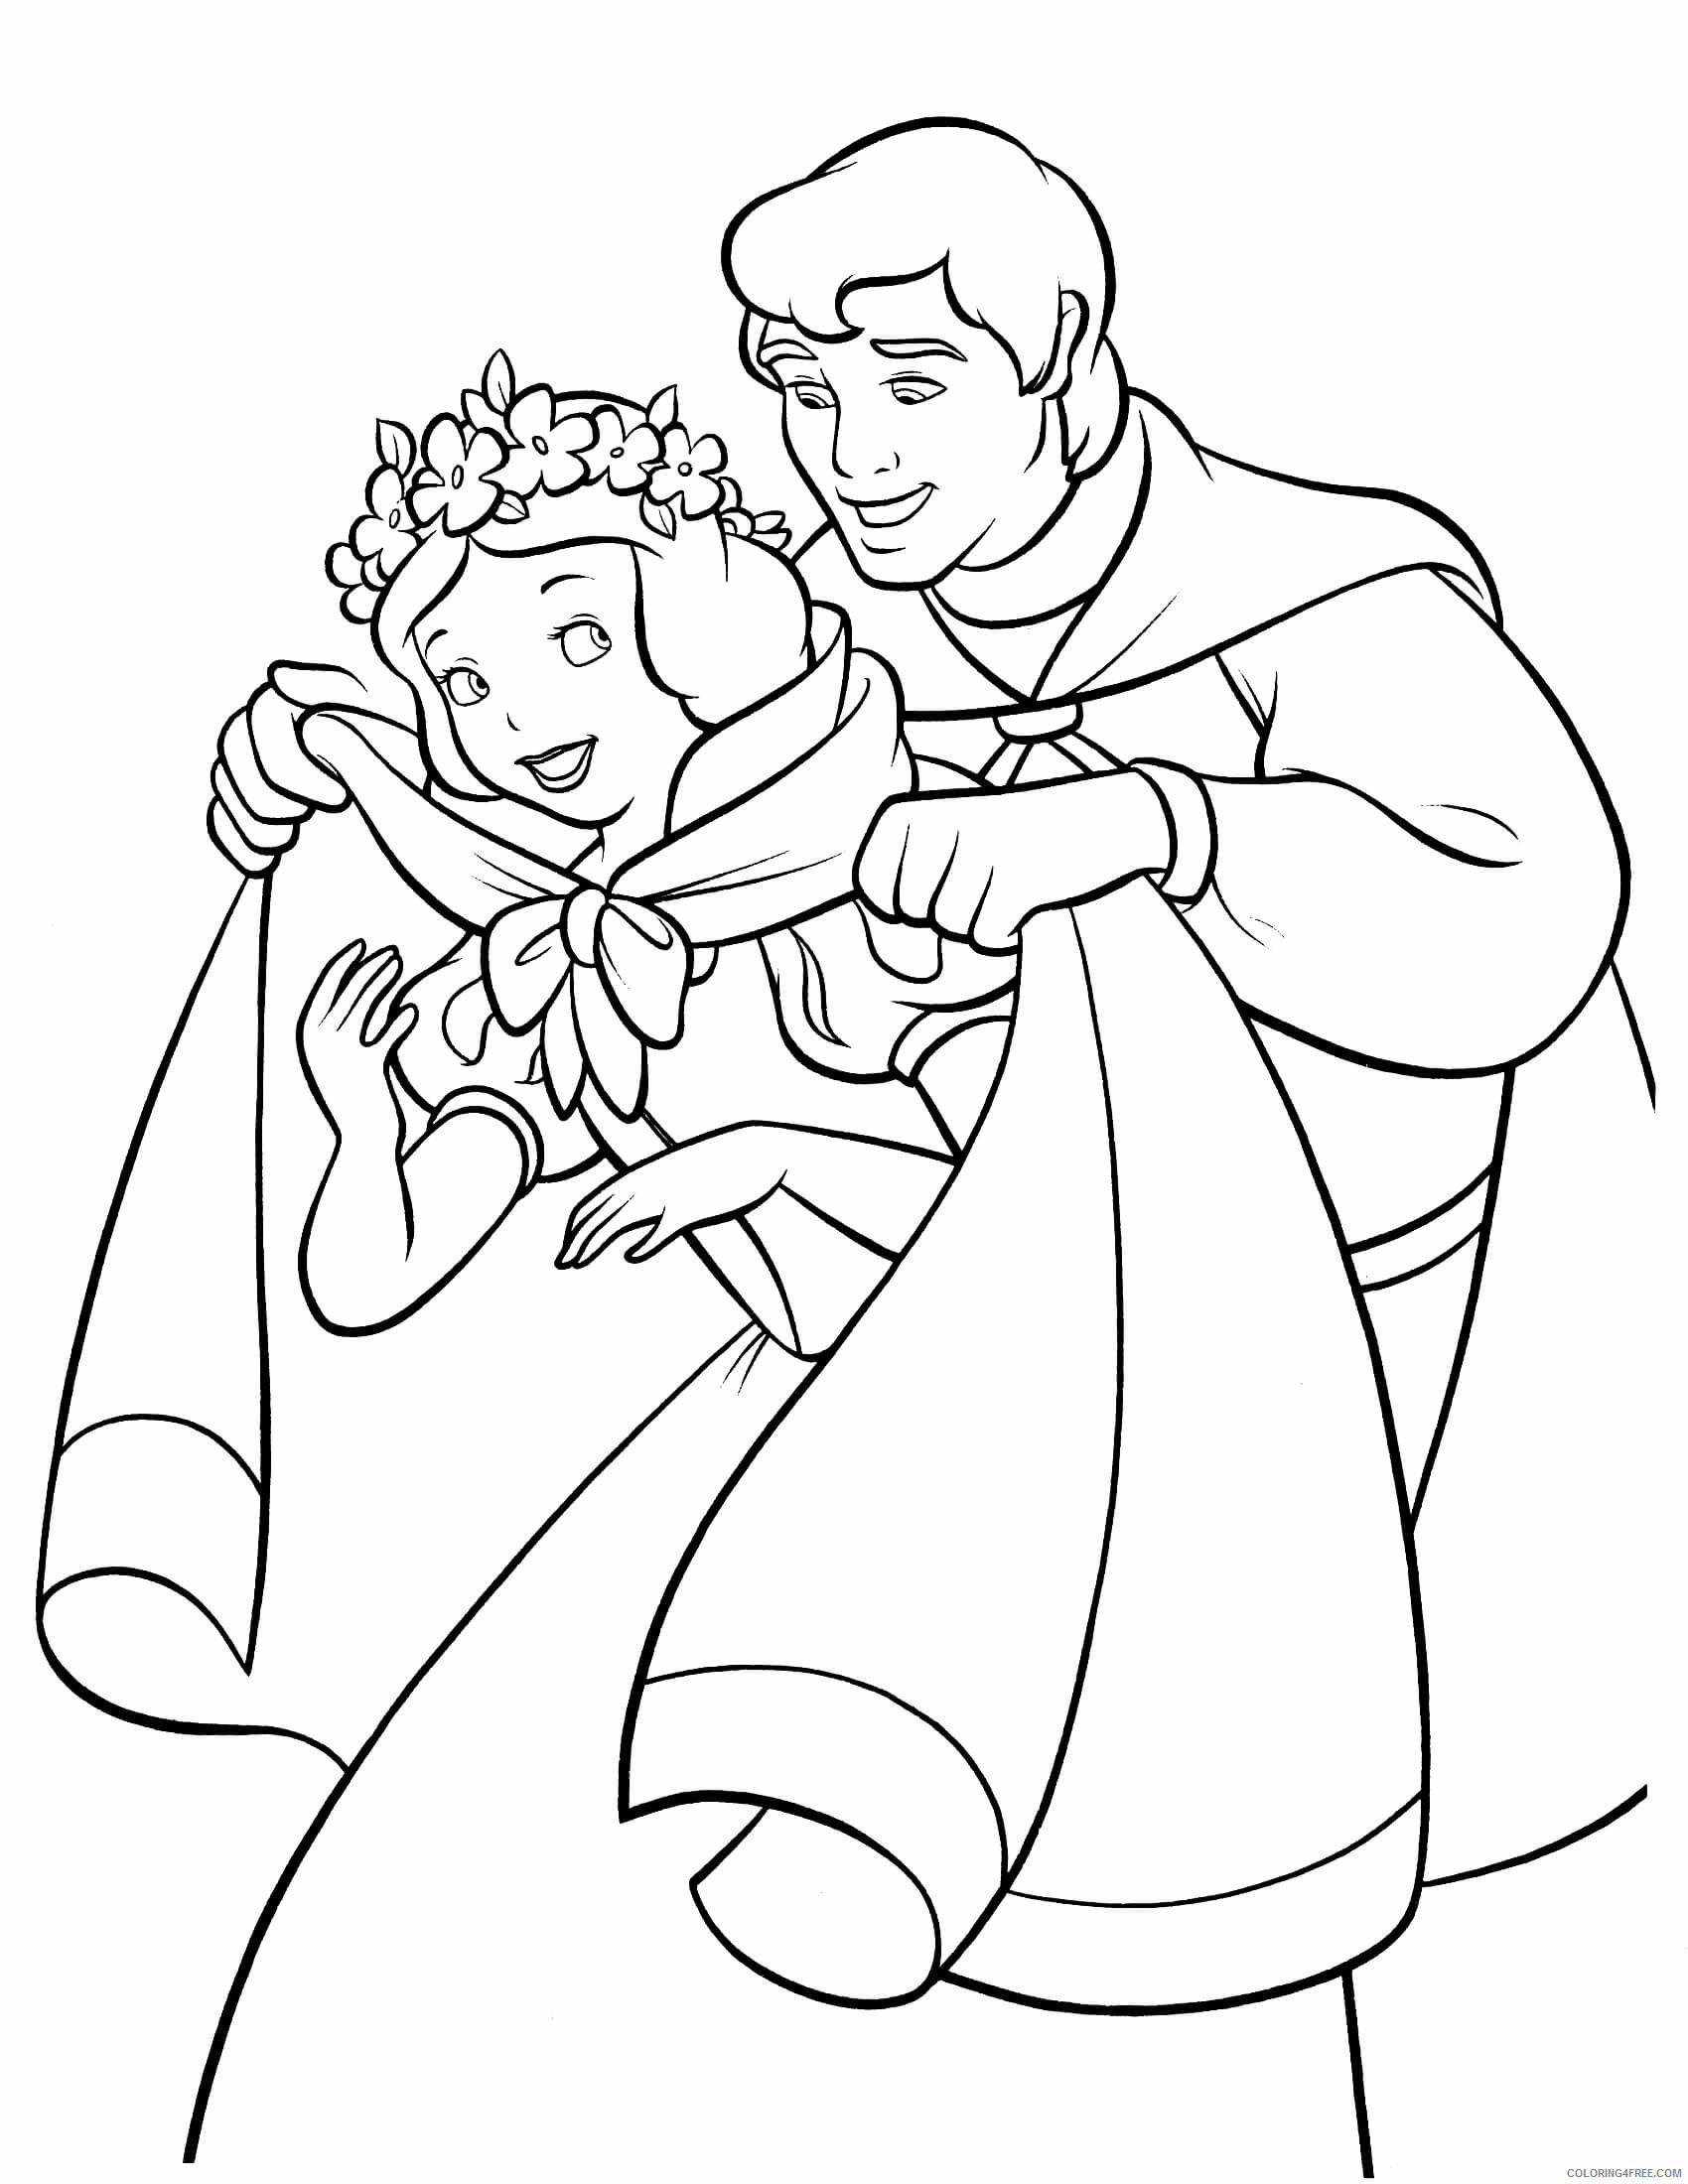 Snow White Coloring Pages Cartoons Snow White Pictures to Printable 2020 5817 Coloring4free